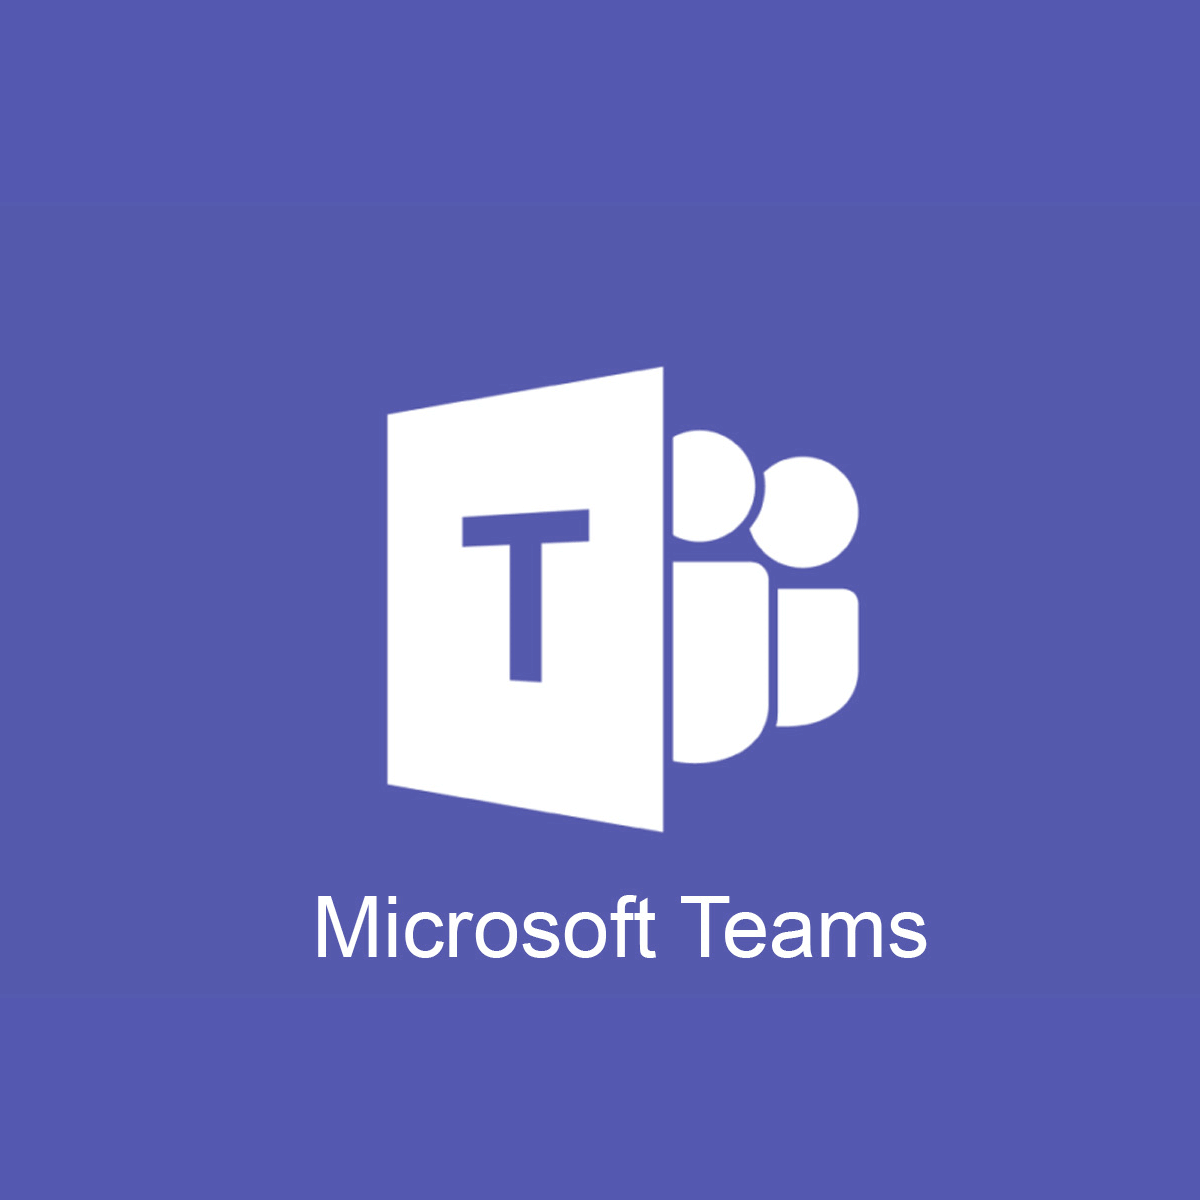 ms teams free download for windows 10